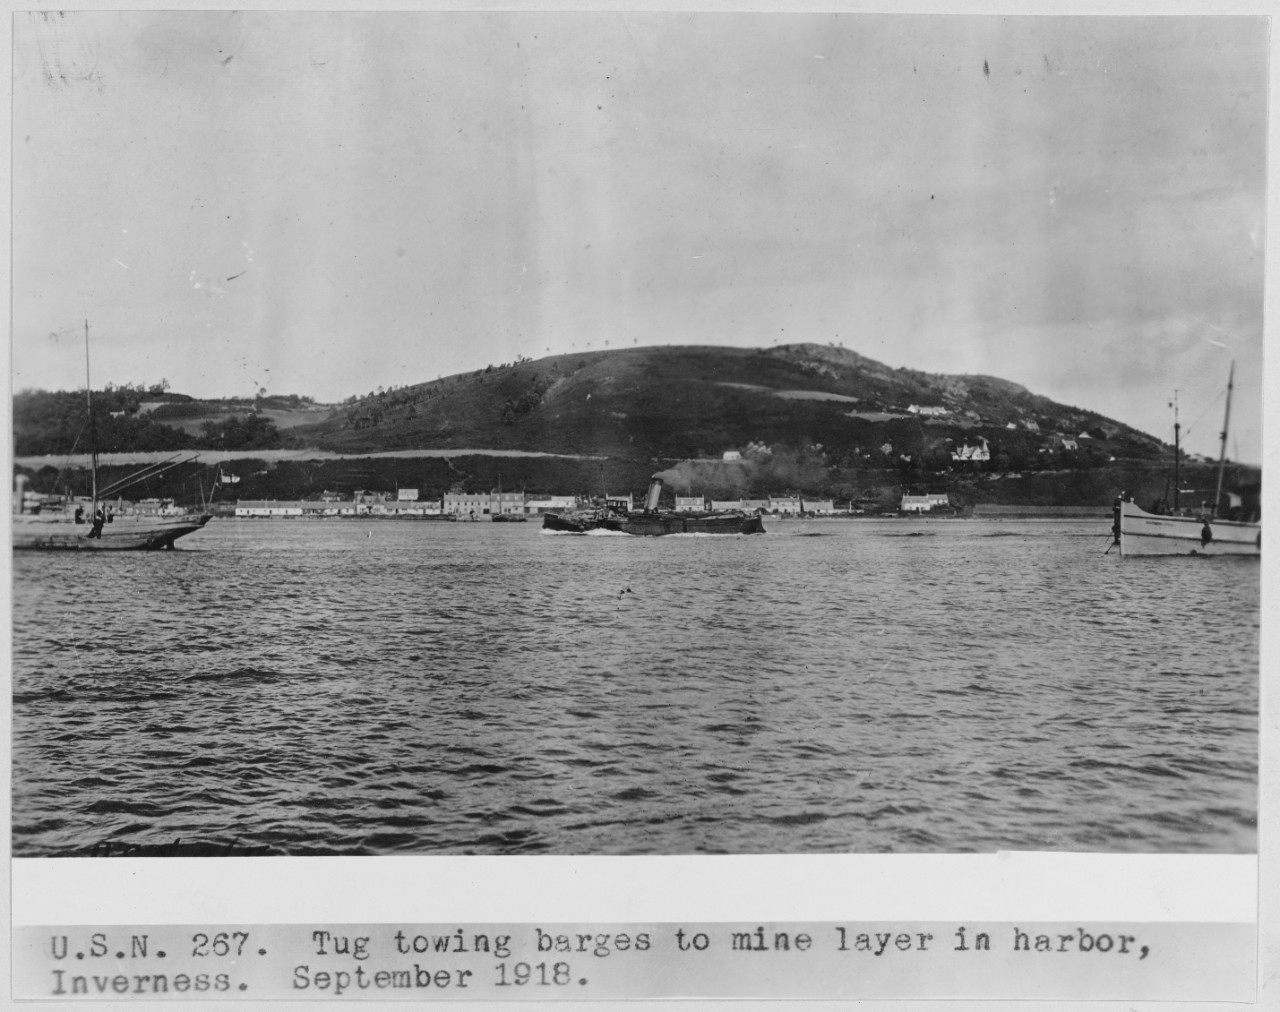 Tug towing barges to mine layer in harbor, Inverness, Scotland. September 1918. USN 267